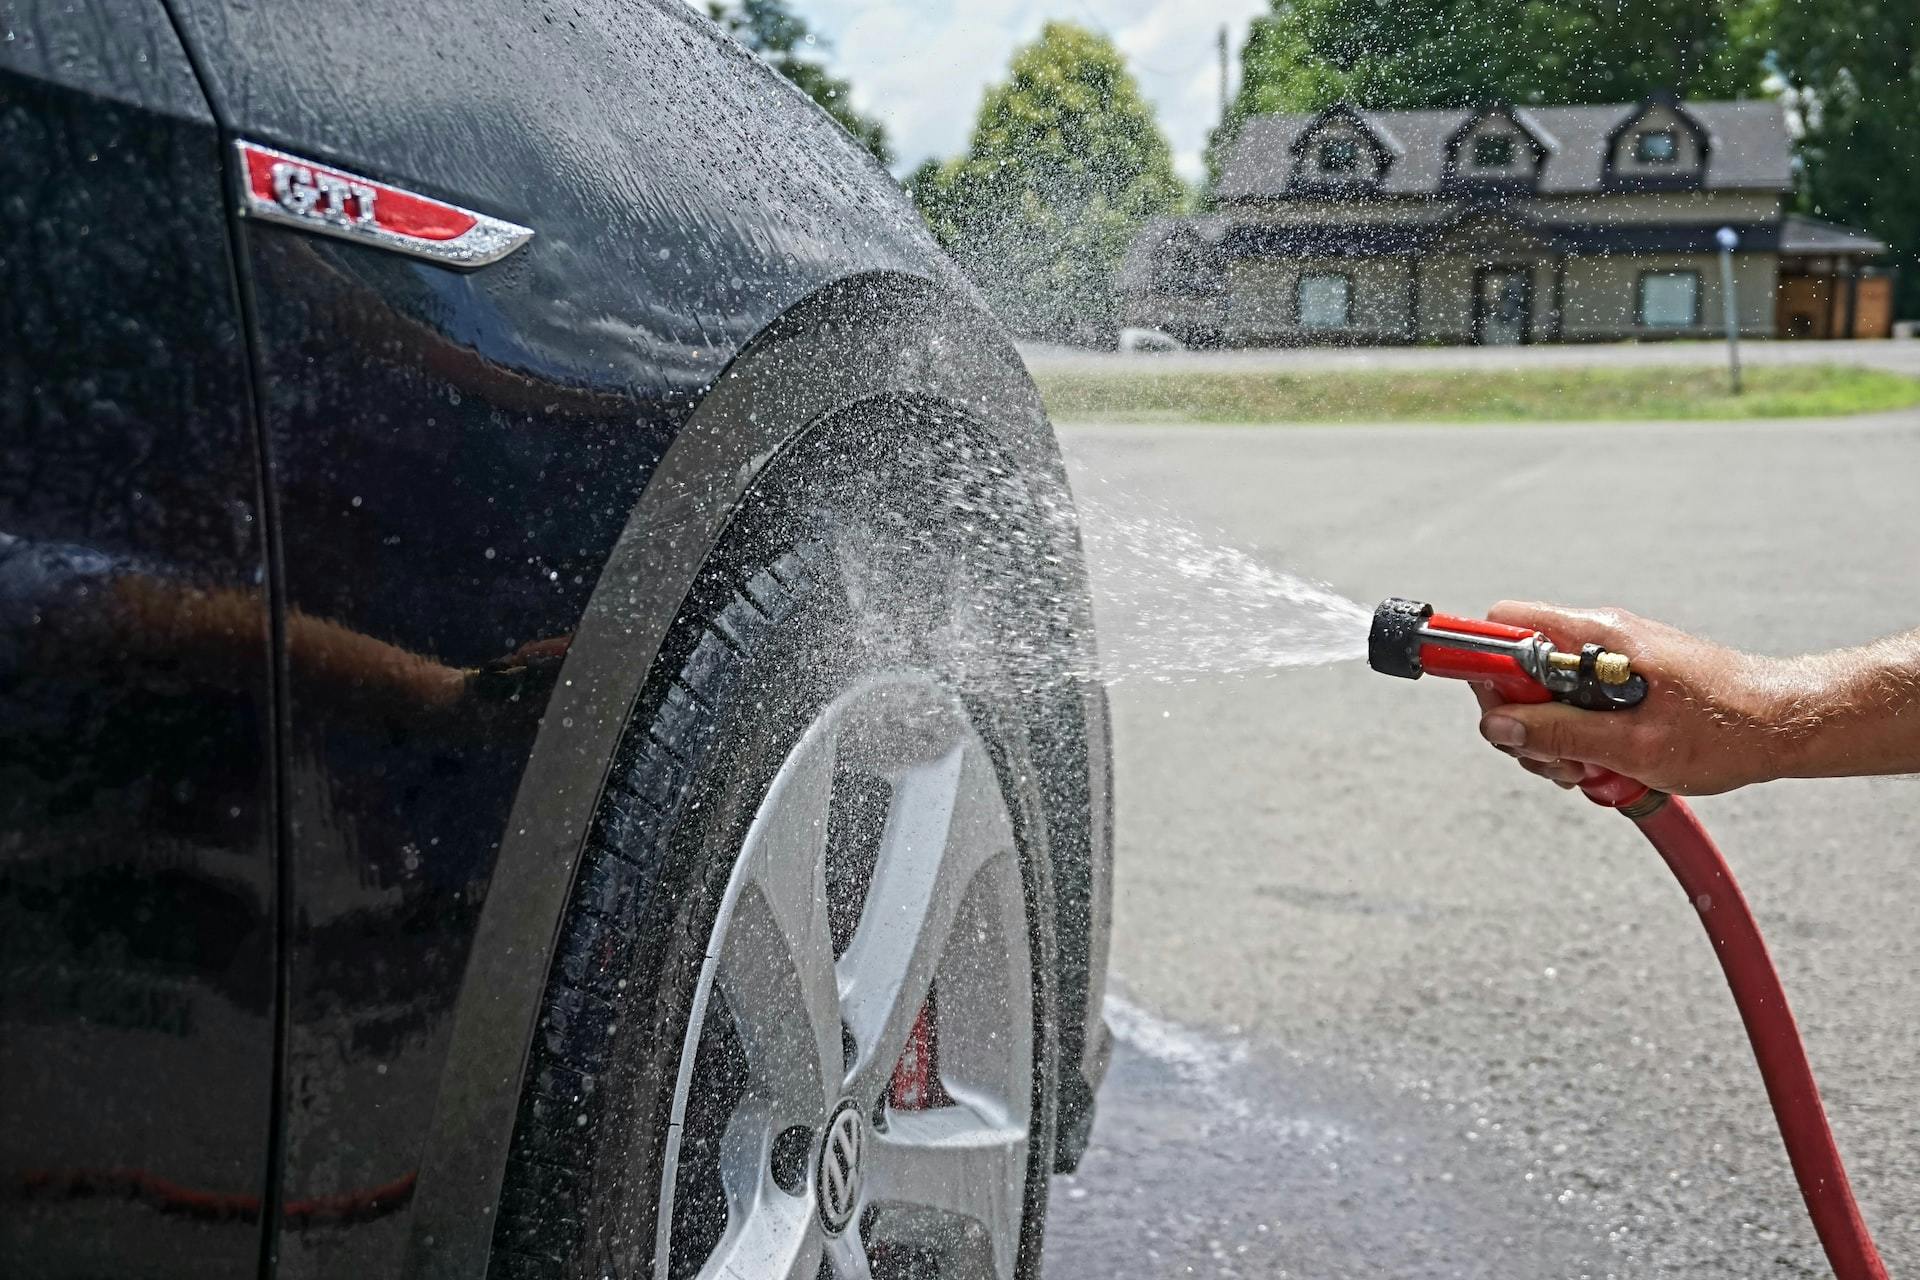 Pressure Washing Companies: Are They Using Your Water?